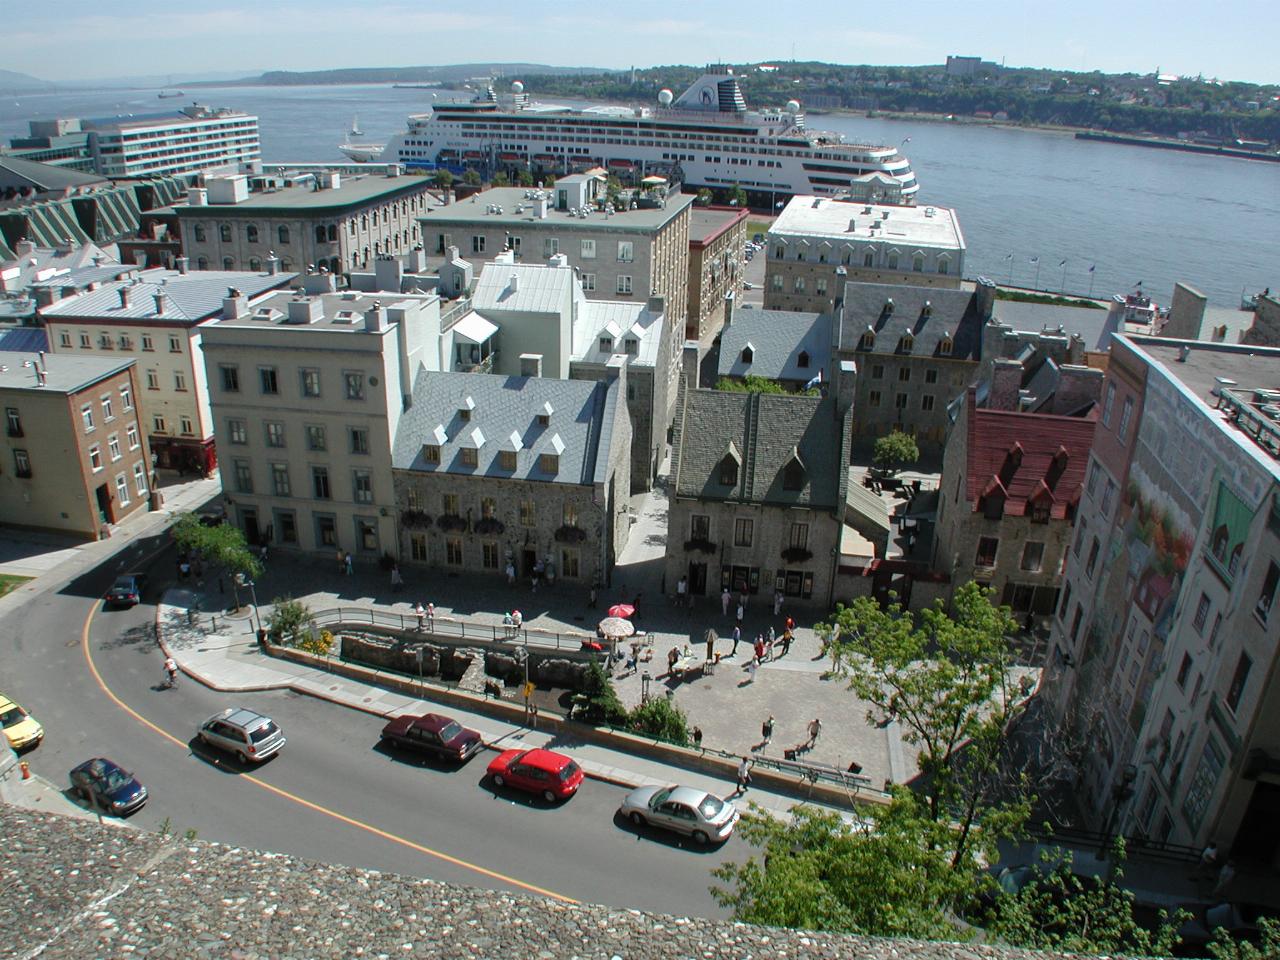 Looking over lower old town in Quebec City, looking north (downstream) on St. Lawrence River